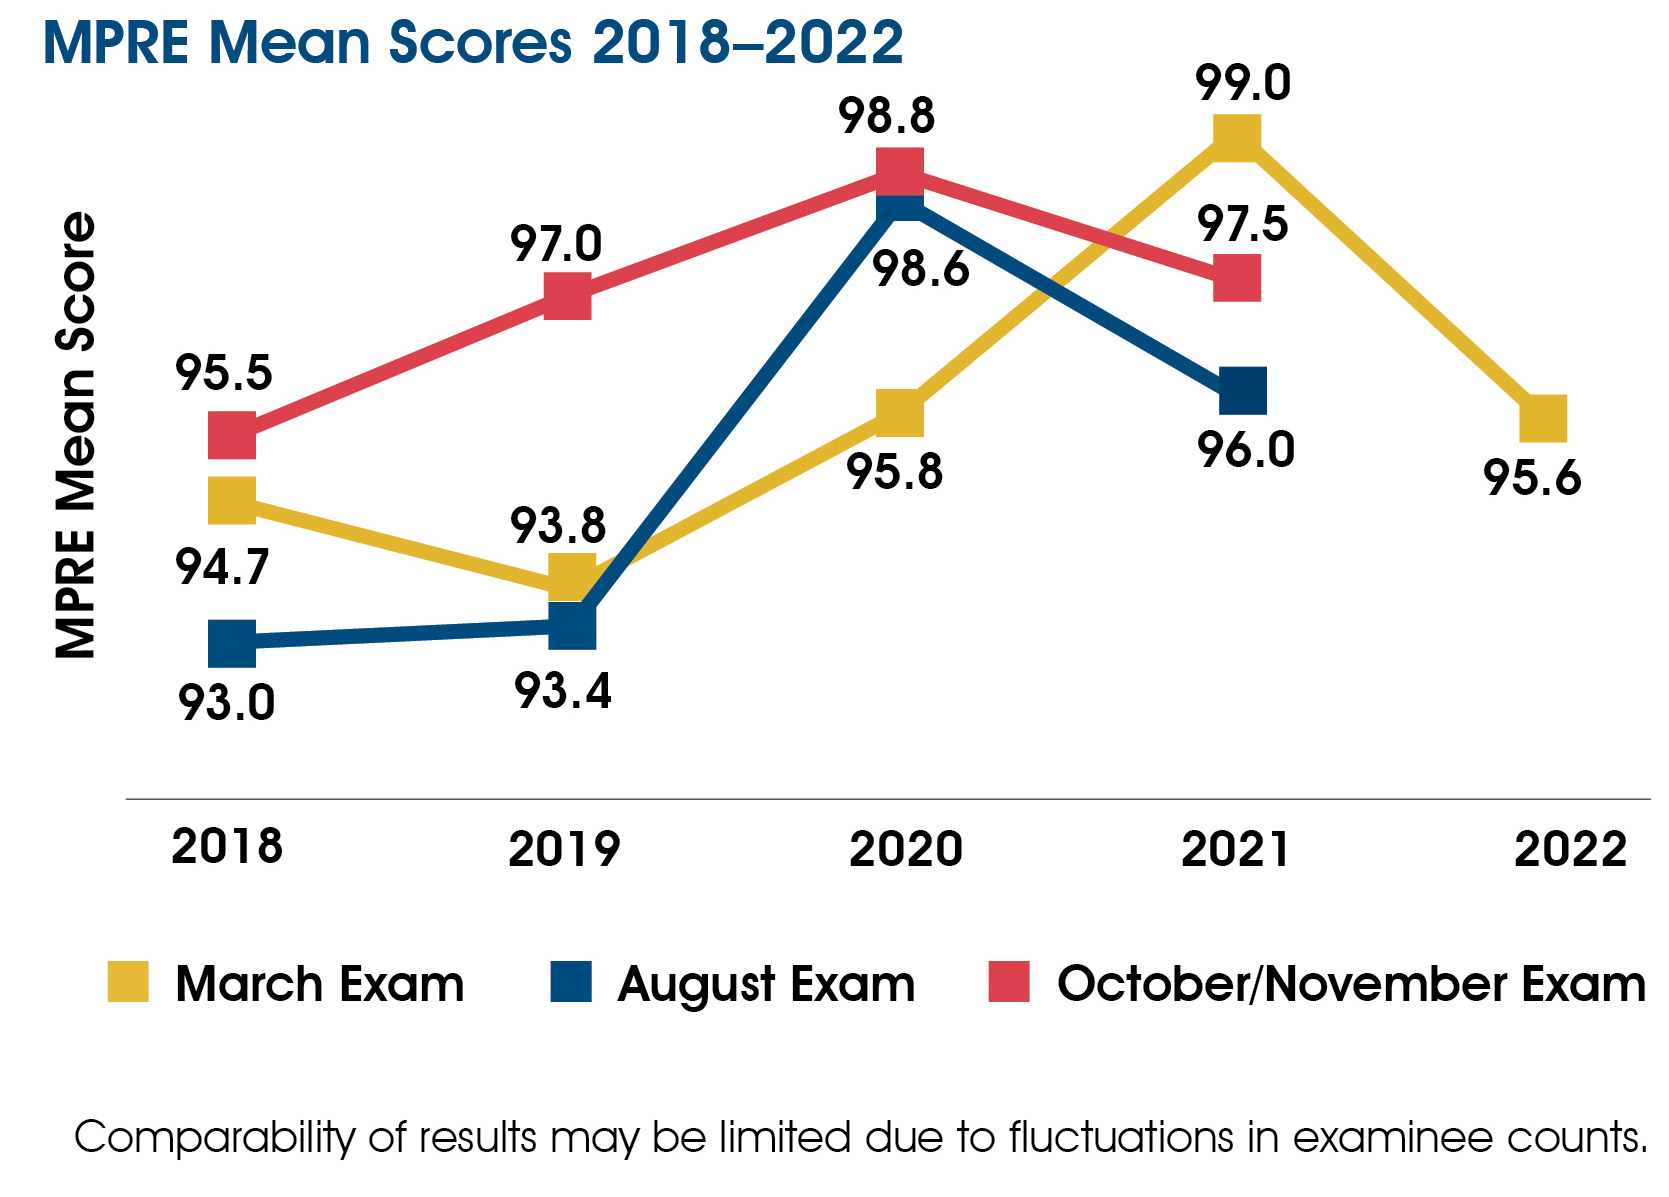 A chart showing MPRE mean scores 2018-2022. In March 2018-2022 the mean score was 94.7, 93.8, 95.8, 99.0, and 95.6. In August 2018-2021 the mean score was 93.0, 93.4, 98.6, and 96.0. In October/November 2018-2021 the mean score was 95.5, 97.0, 98.8, and 97.5. The chart includes the following note: Comparability of results may be limited due to fluctuations in examinee counts.